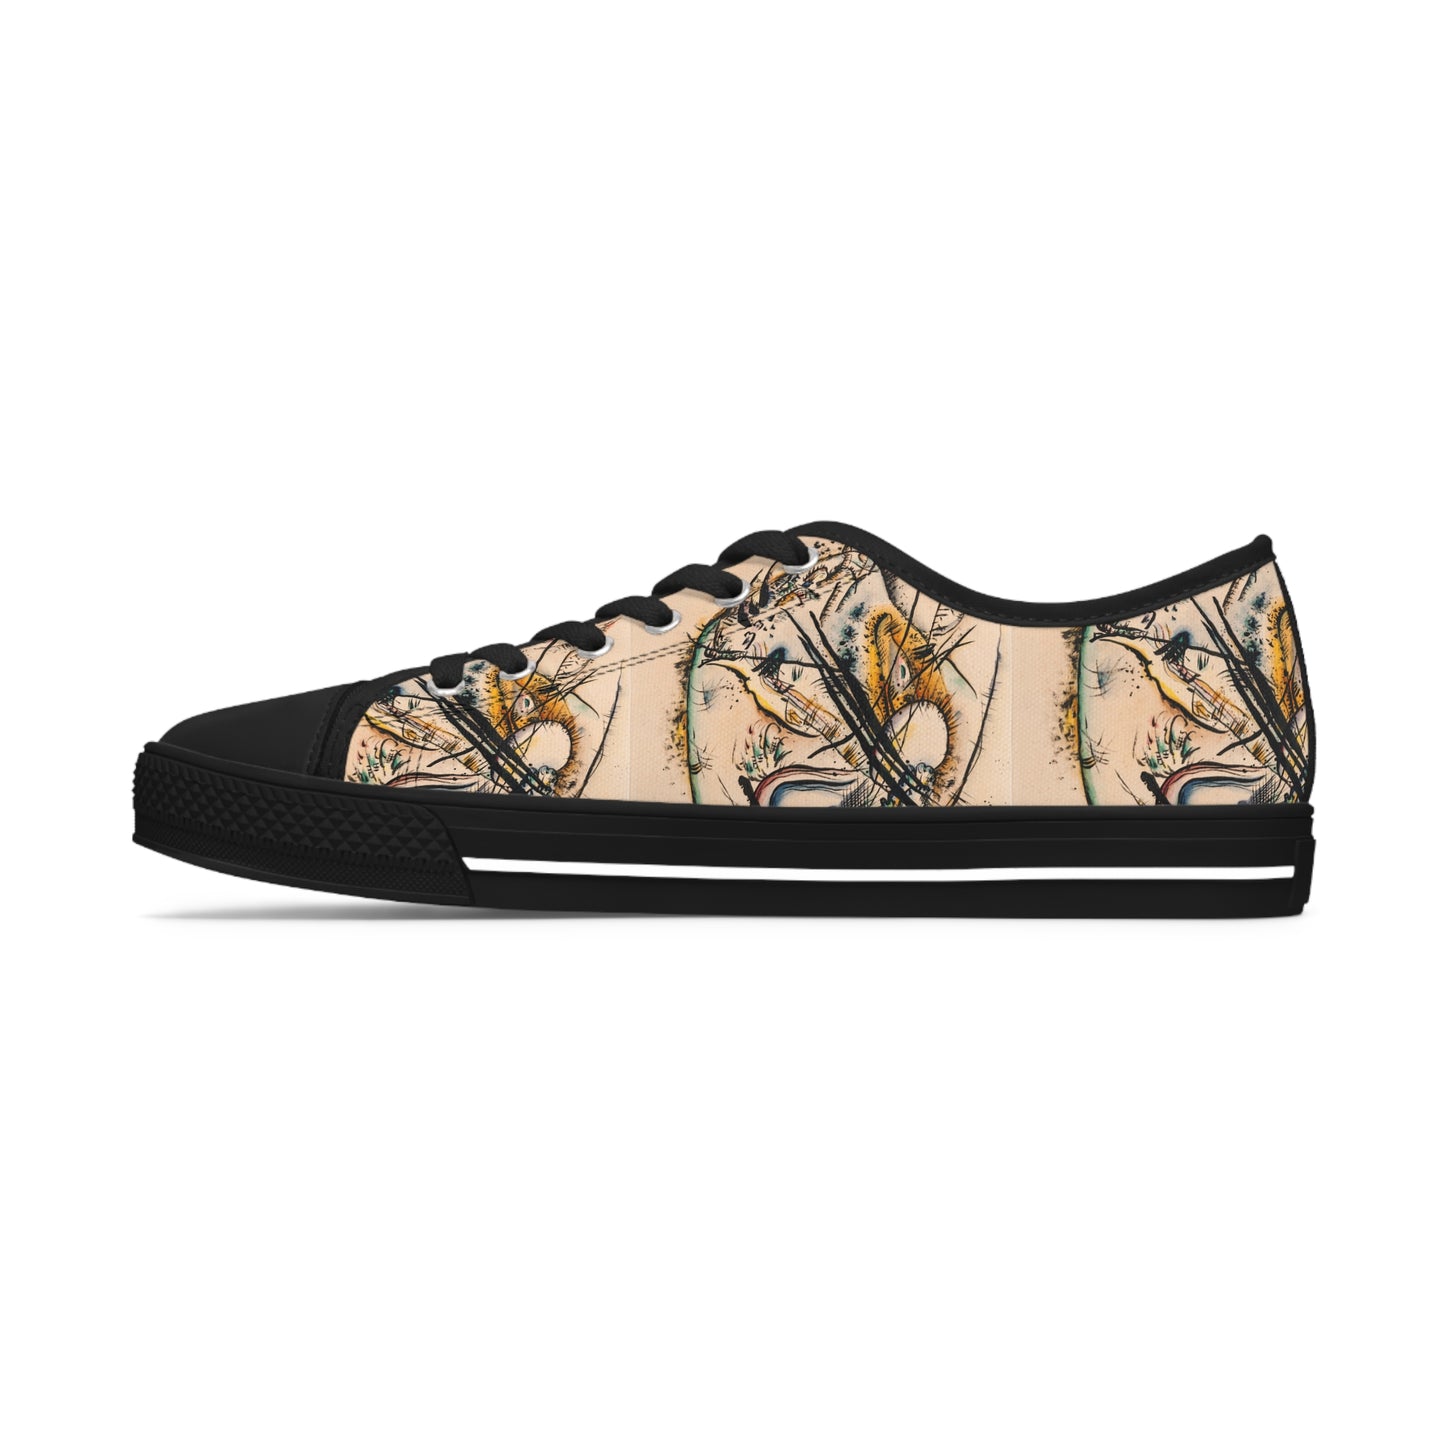 WASSILY KANDINSKY - WATERCOLOUR WITH SEVEN STROKES - LOW TOP ART SNEAKERS